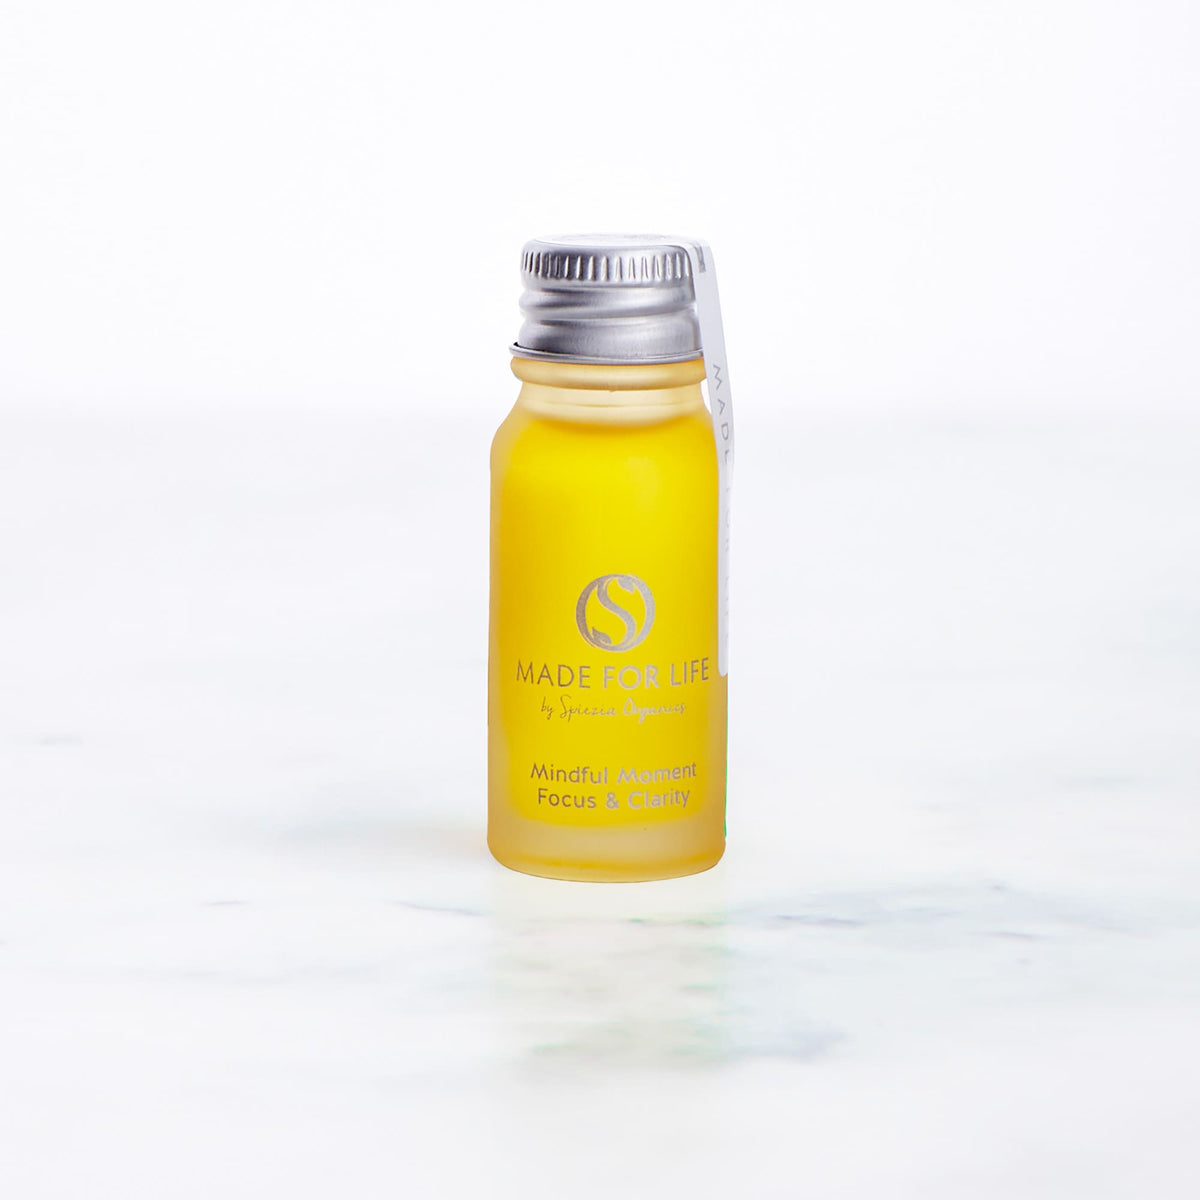 Mindful Moment - Focus and Clarity 10ml – Made For Life Organics